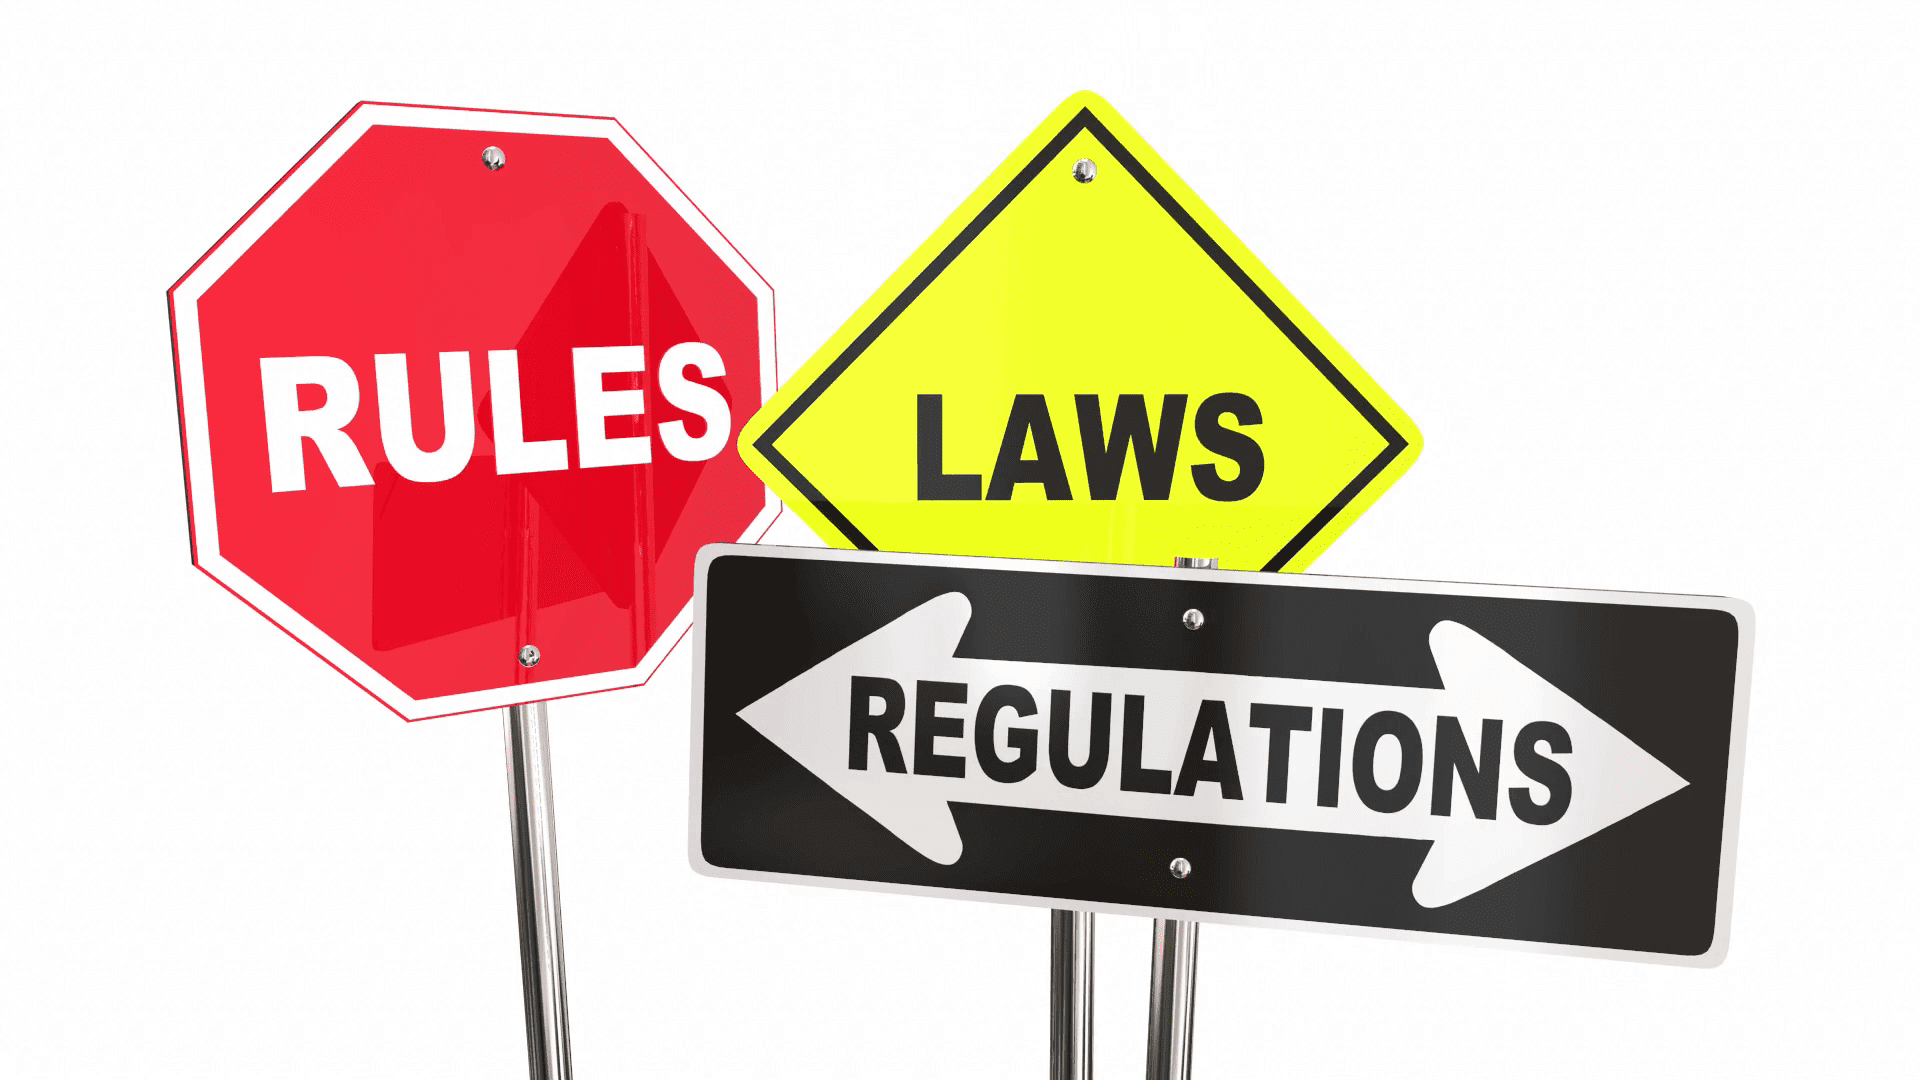 Traffic signs displaying "Rules," "Laws," and "Regulations" on a white background. Be your own captain by understanding and following these guidelines.